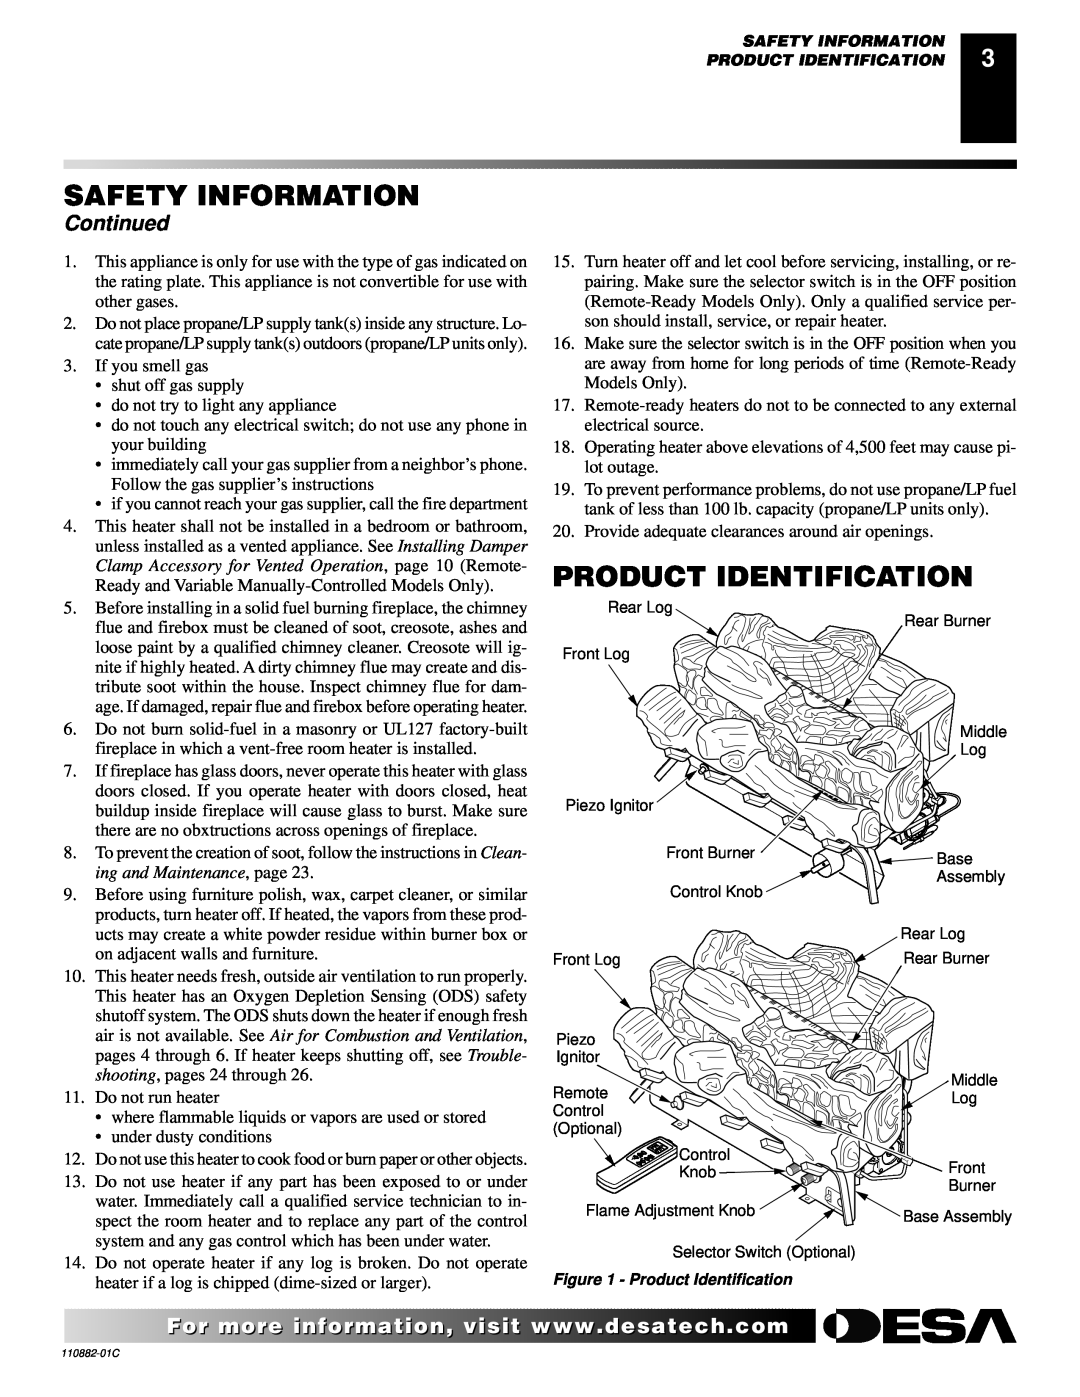 Desa R, V, T, 30 installation manual Product Identification, Continued, Safety Information 